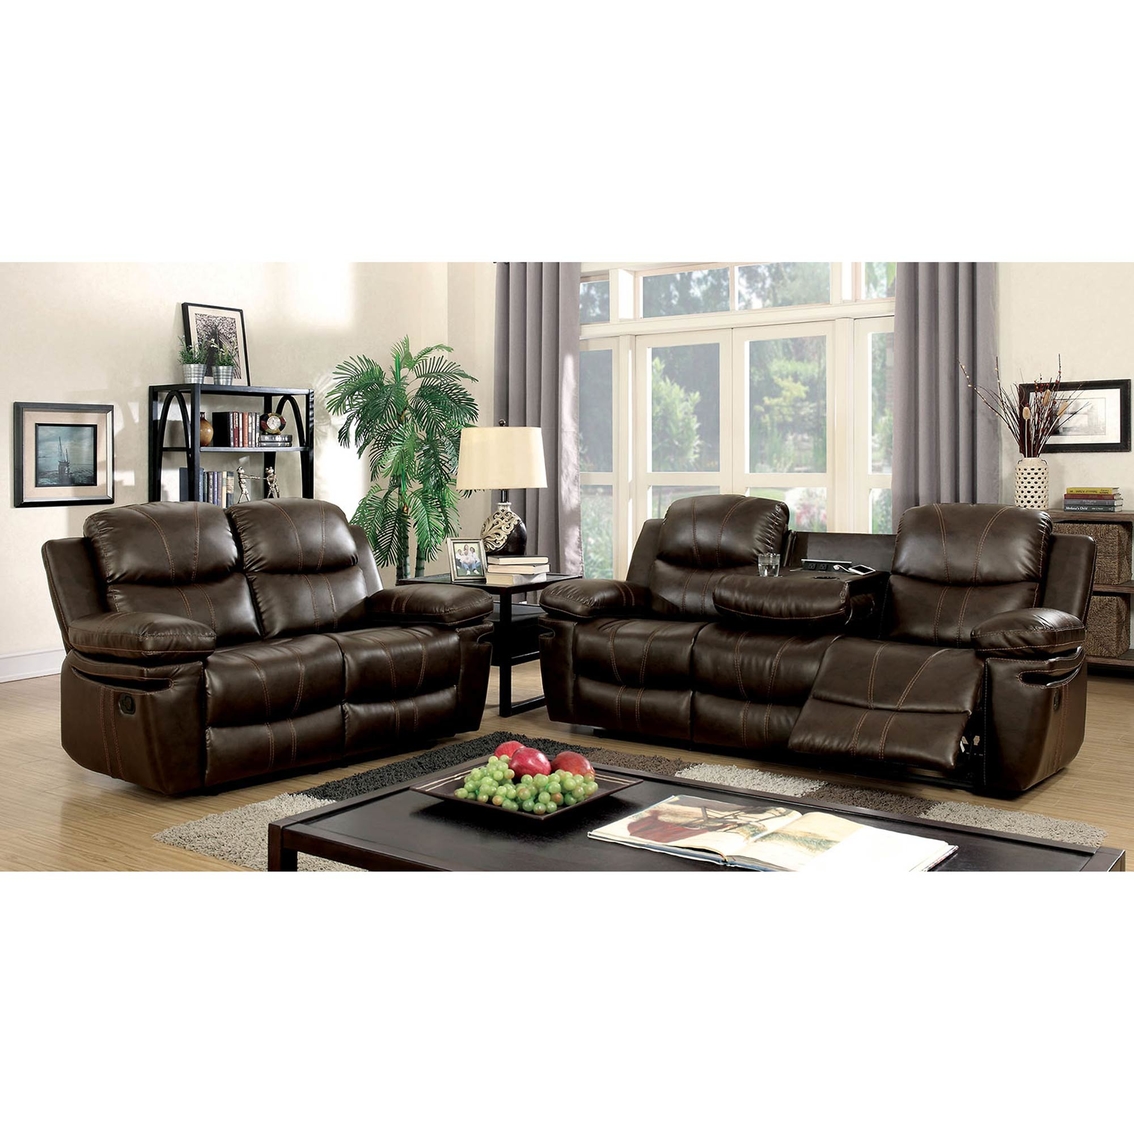 Furniture of America Listowel Bonded Leather Reclining Sofa - Image 2 of 3